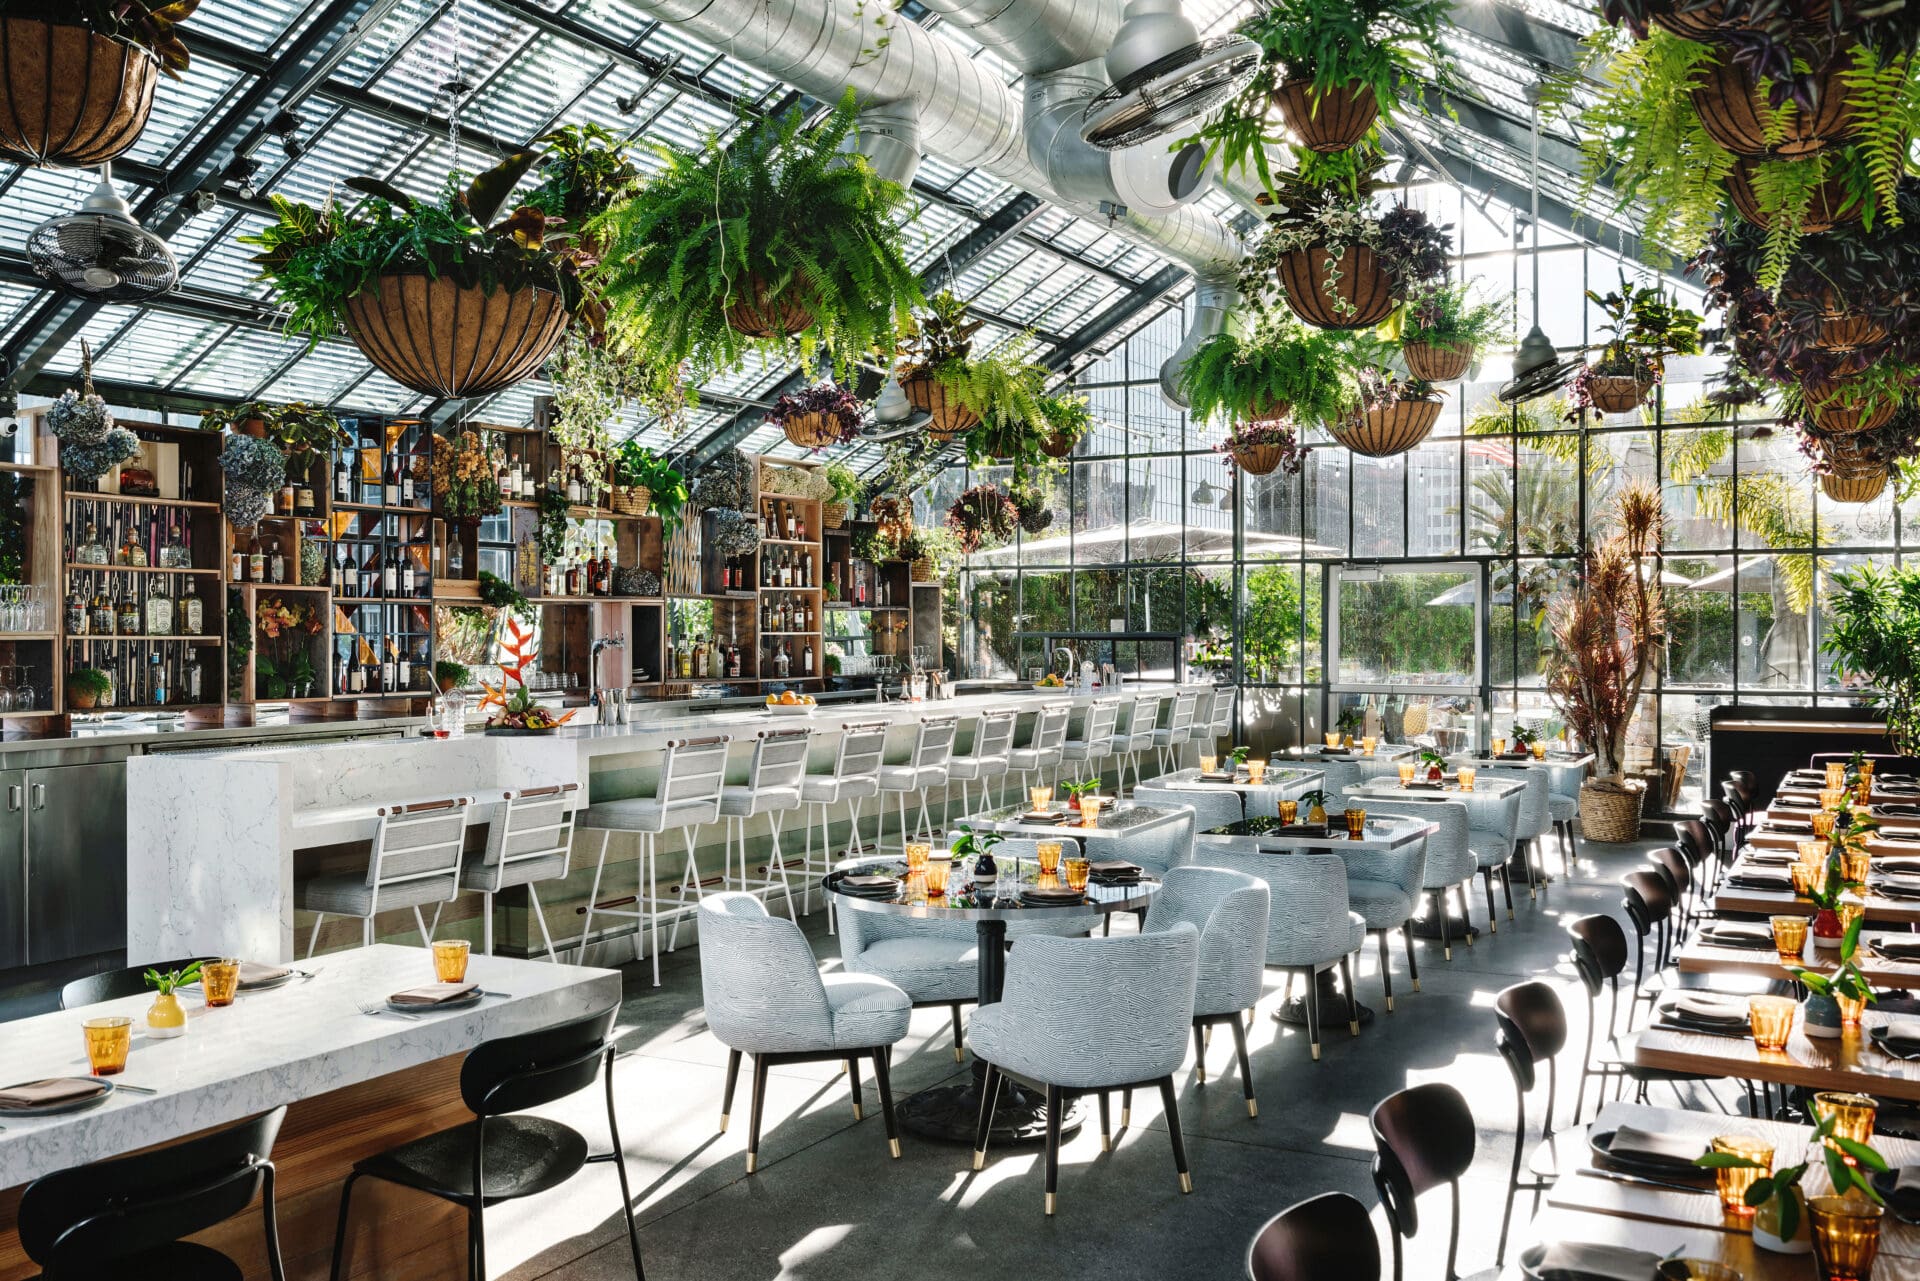 Best places to stay in LA | A restaurant scene inside the glass house Openaire restaurant at The Line Hotel in LA. Pot plants hang from the pitched glass roof, and a long bar with high chairs runs along the left. In the centre and right are two rows of tables and chairs, laid out for lunch